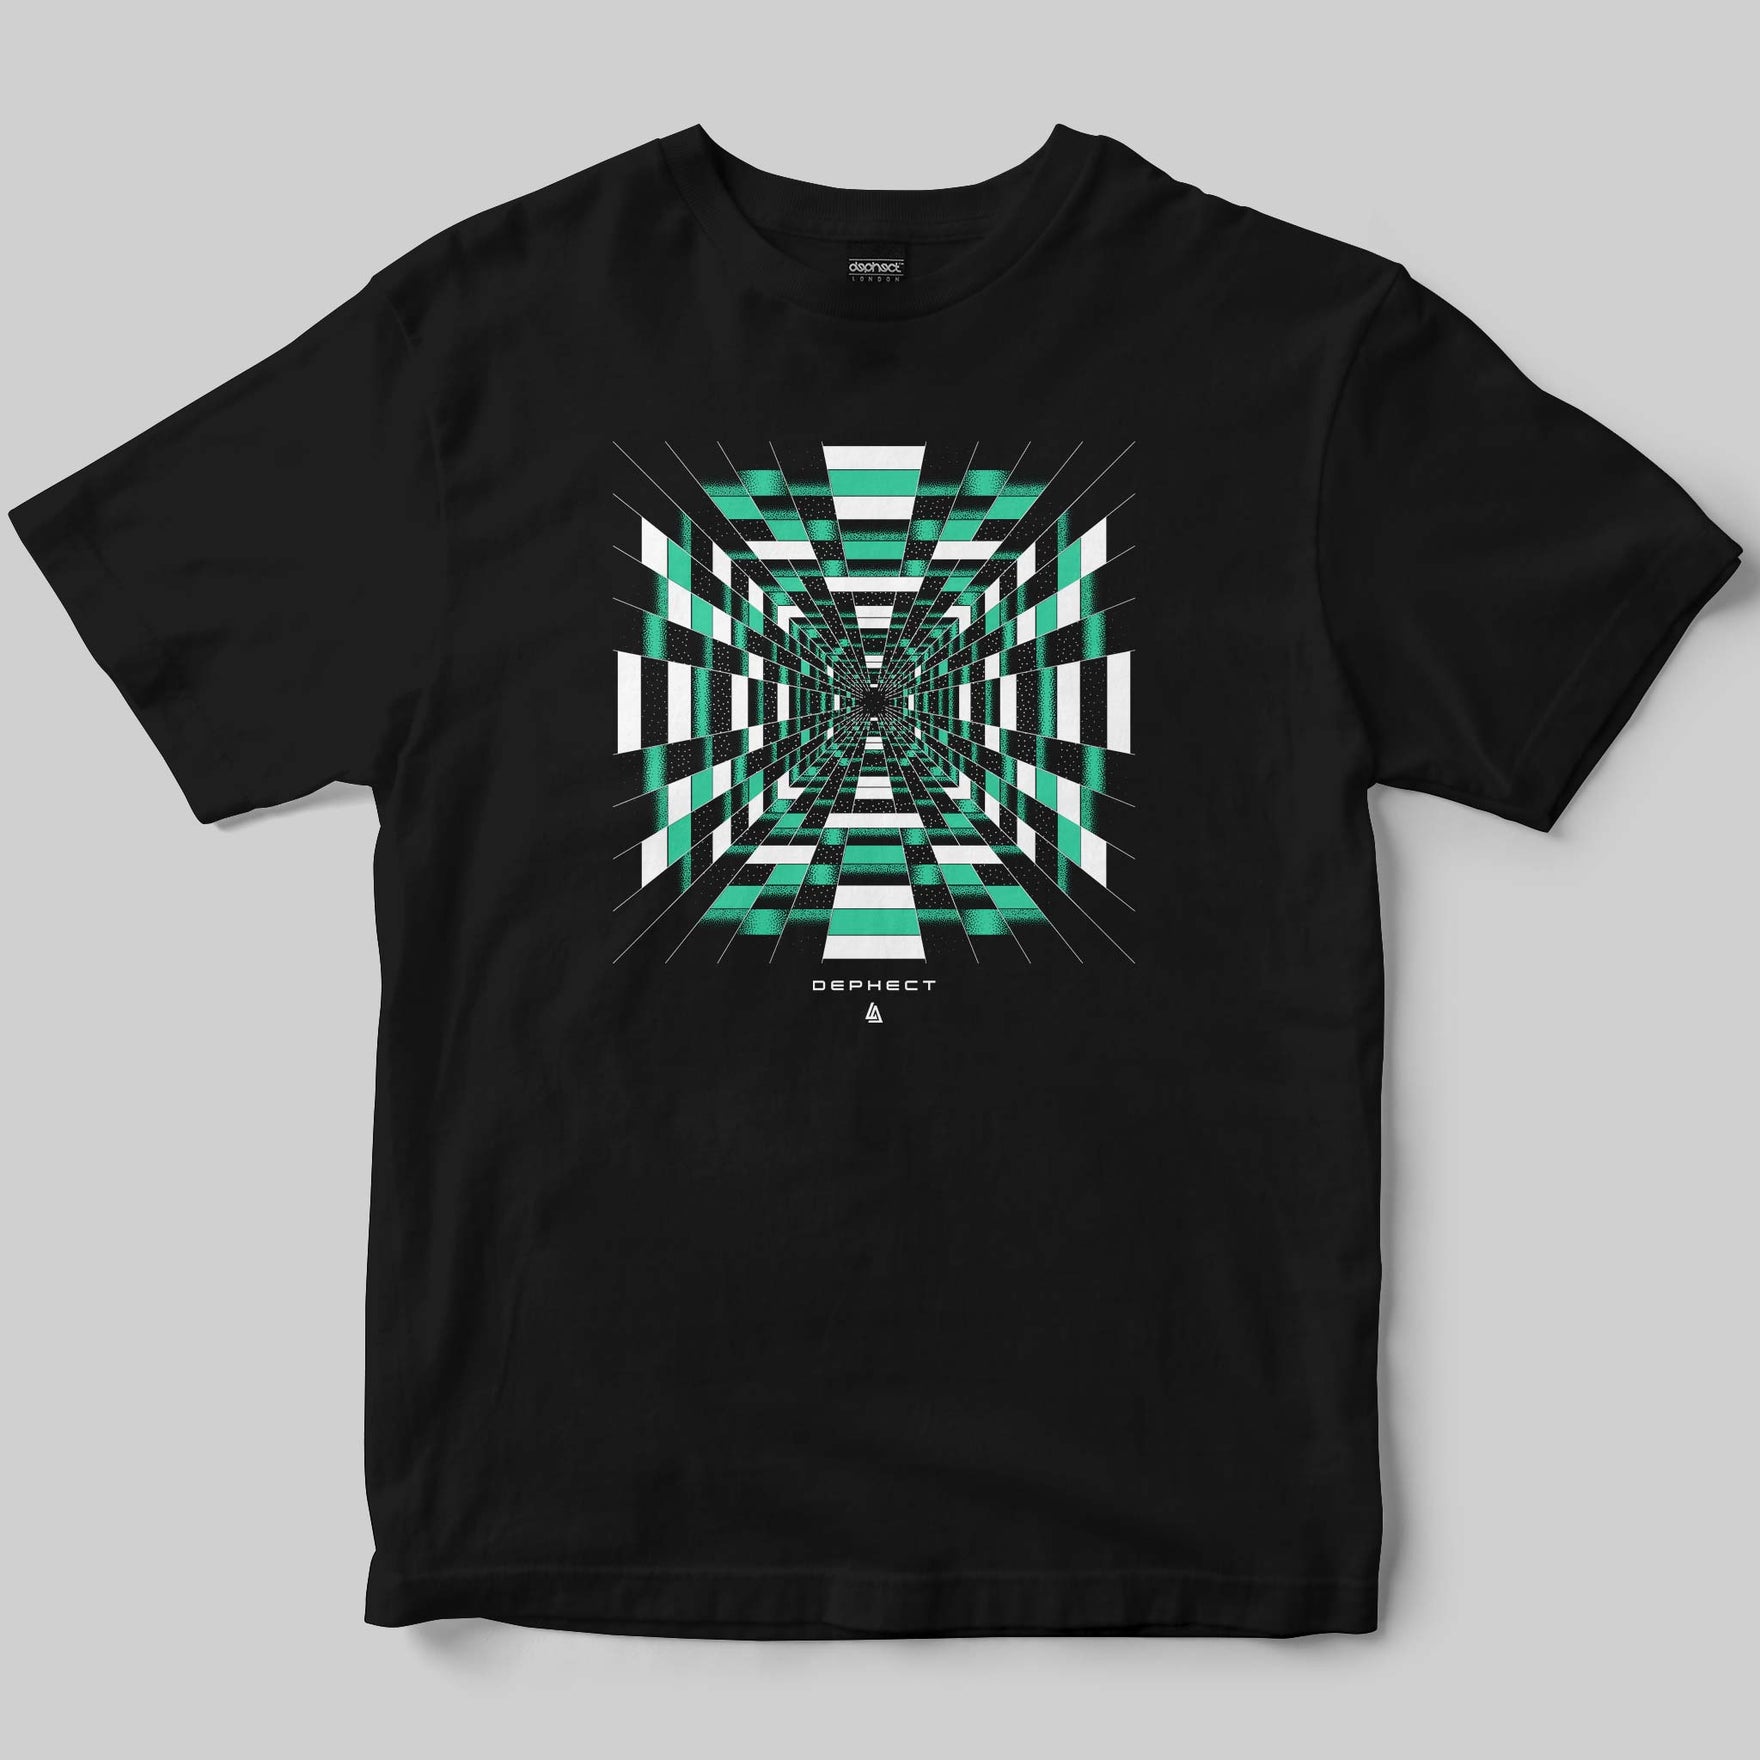 Odyssey T-Shirt / Black / by Robert Anderson